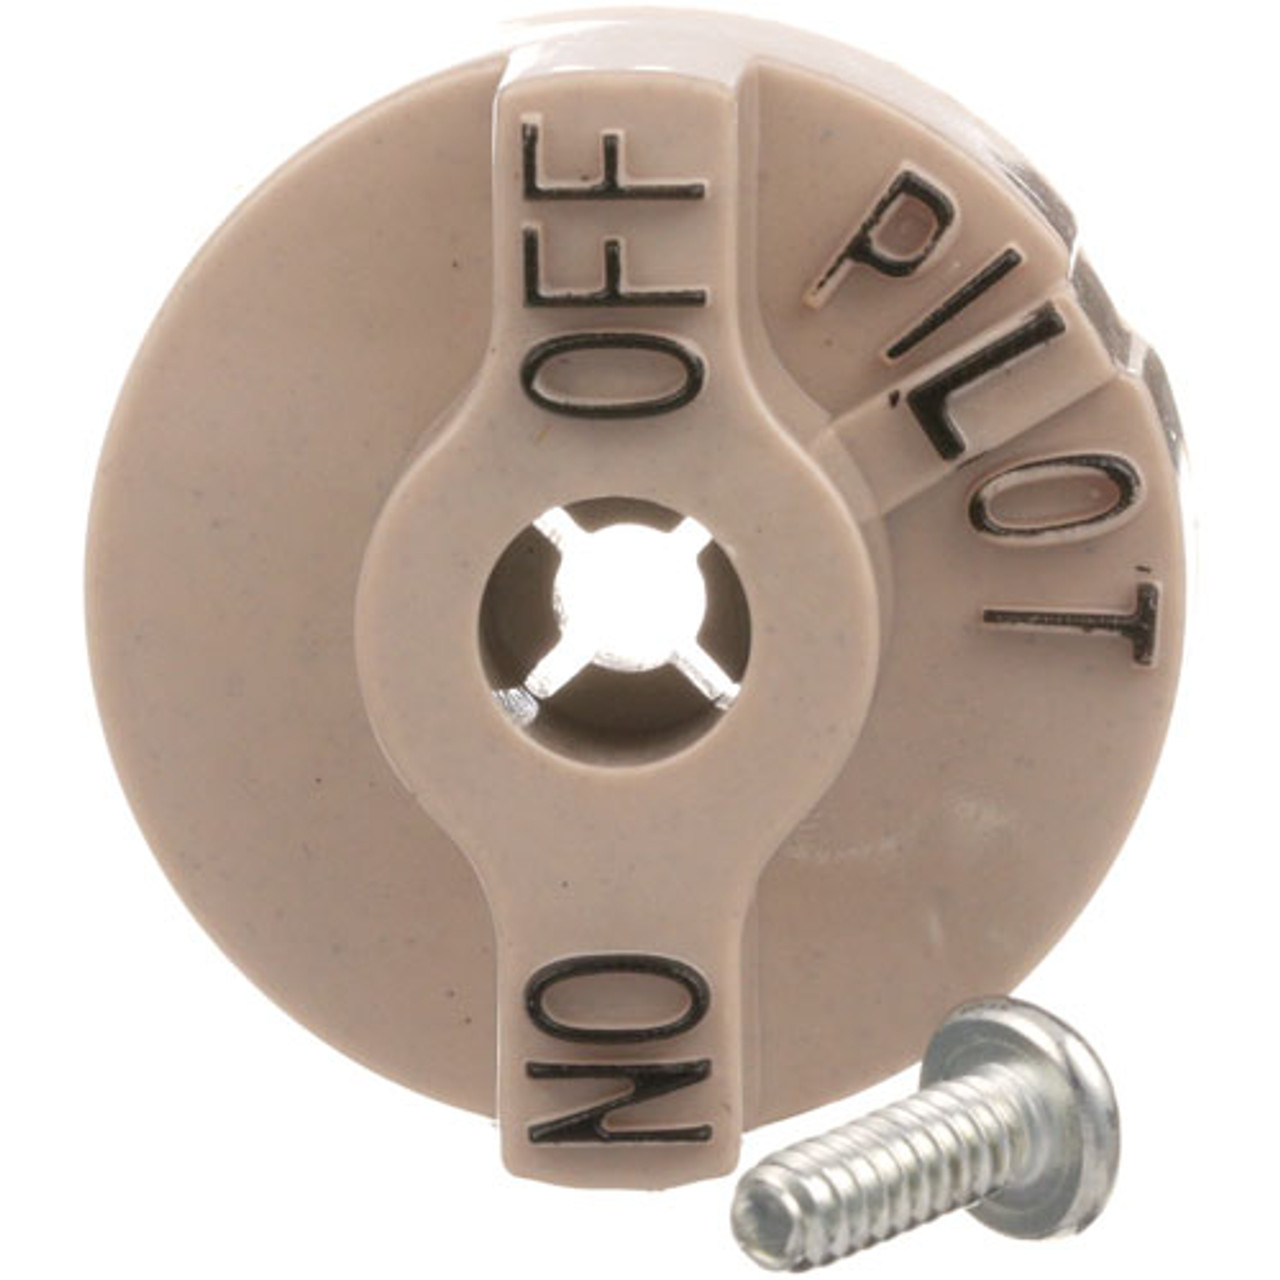 Valve Knob 1-1/4 D, Off-Pilot-On - Replacement Part For Keating 004803